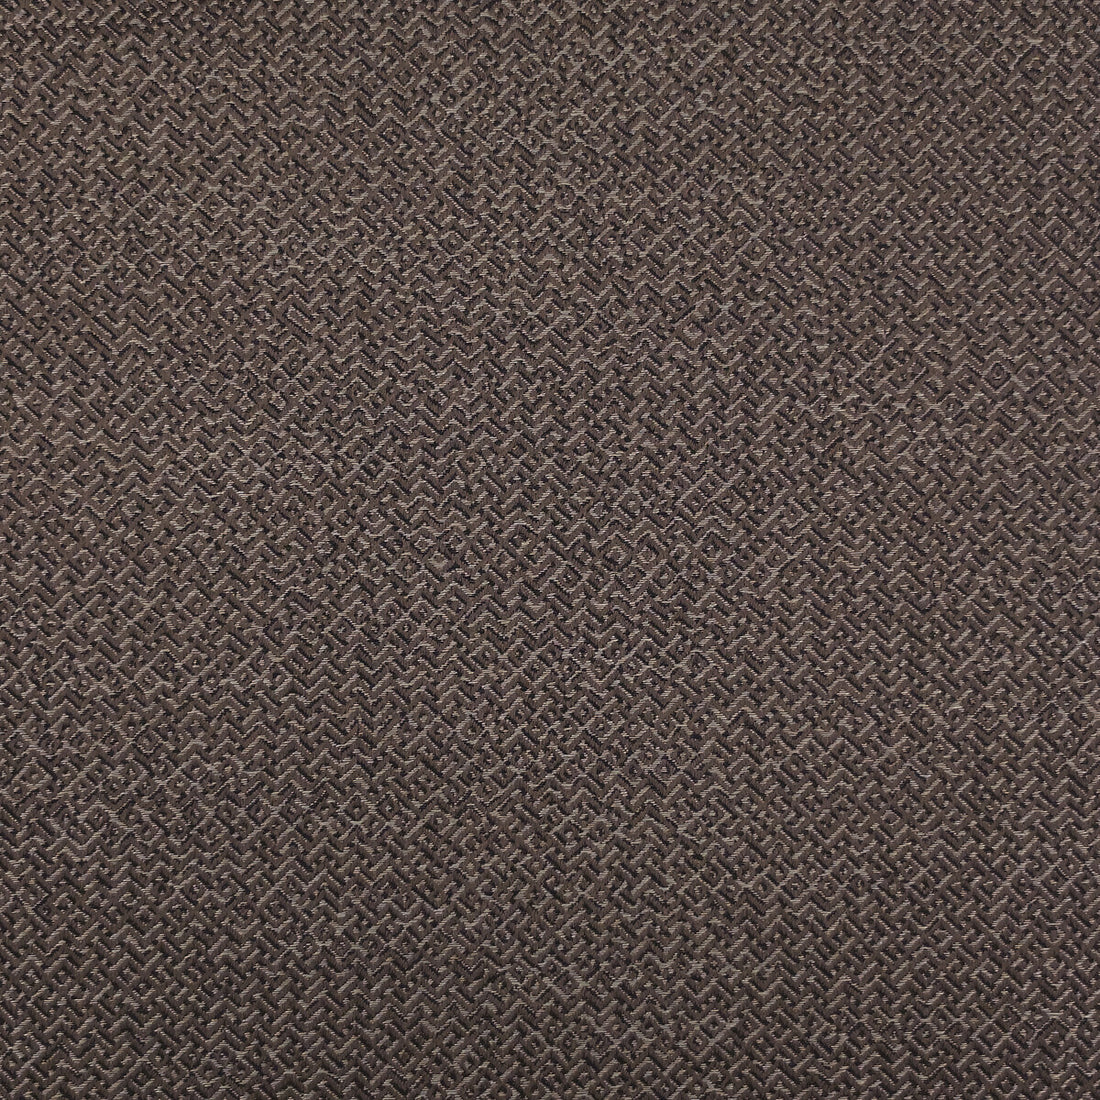 Sublime fabric in 1 color - pattern LZ-30203.01.0 - by Kravet Design in the Lizzo collection